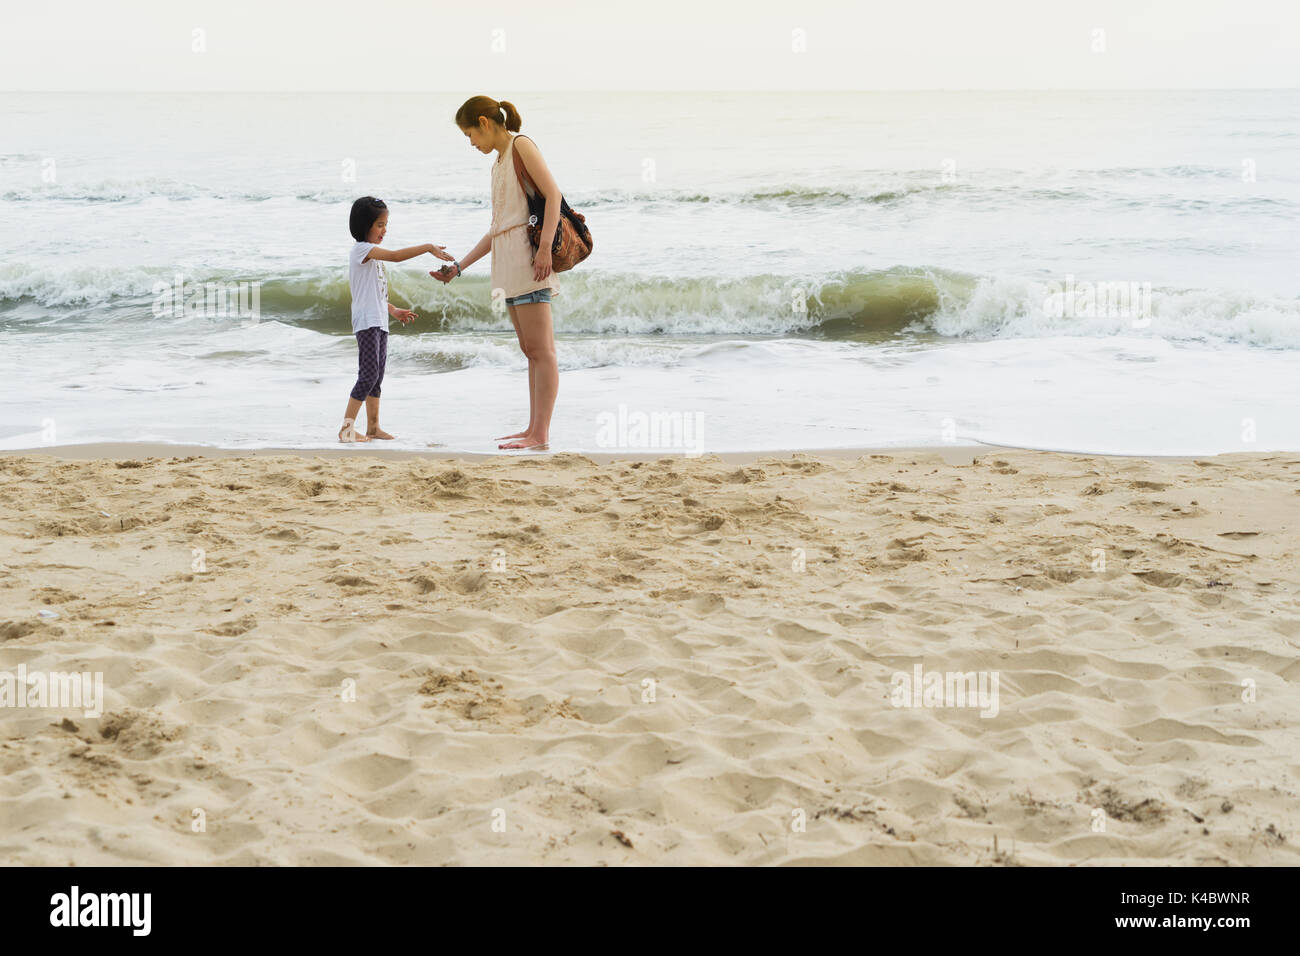 mother and child relationship play beach front Stock Photo